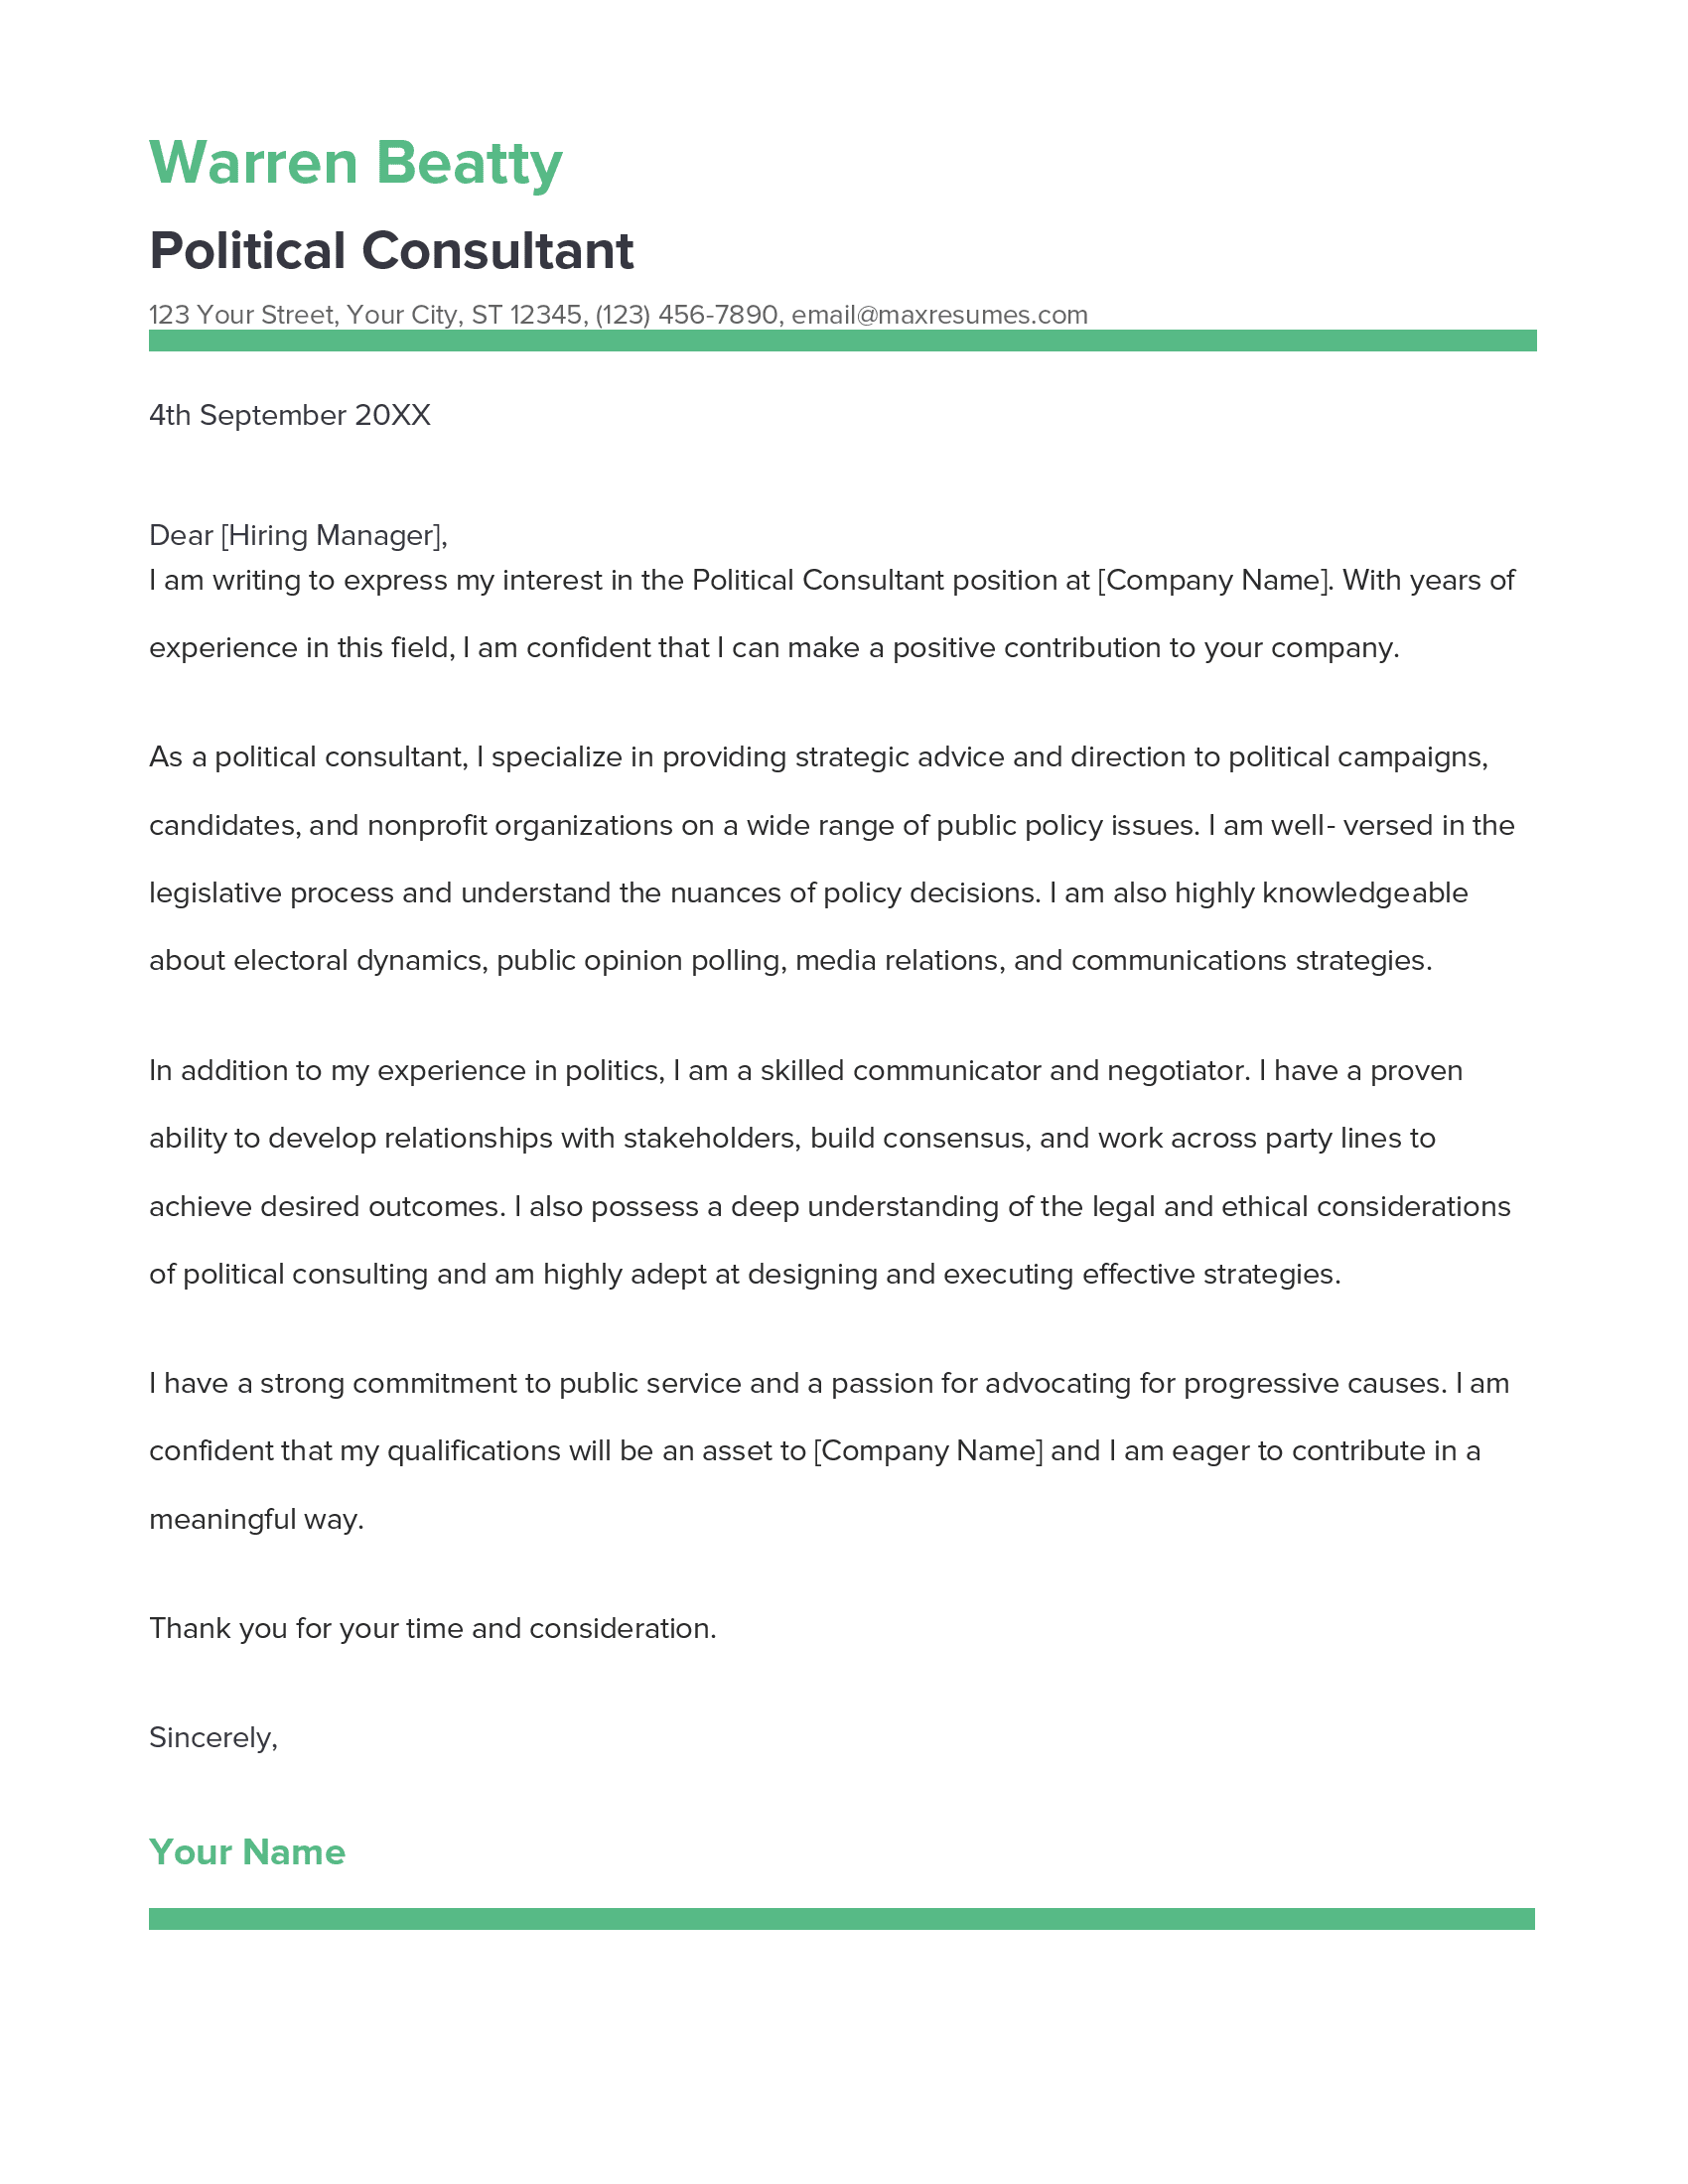 Political Consultant Cover Letter Example